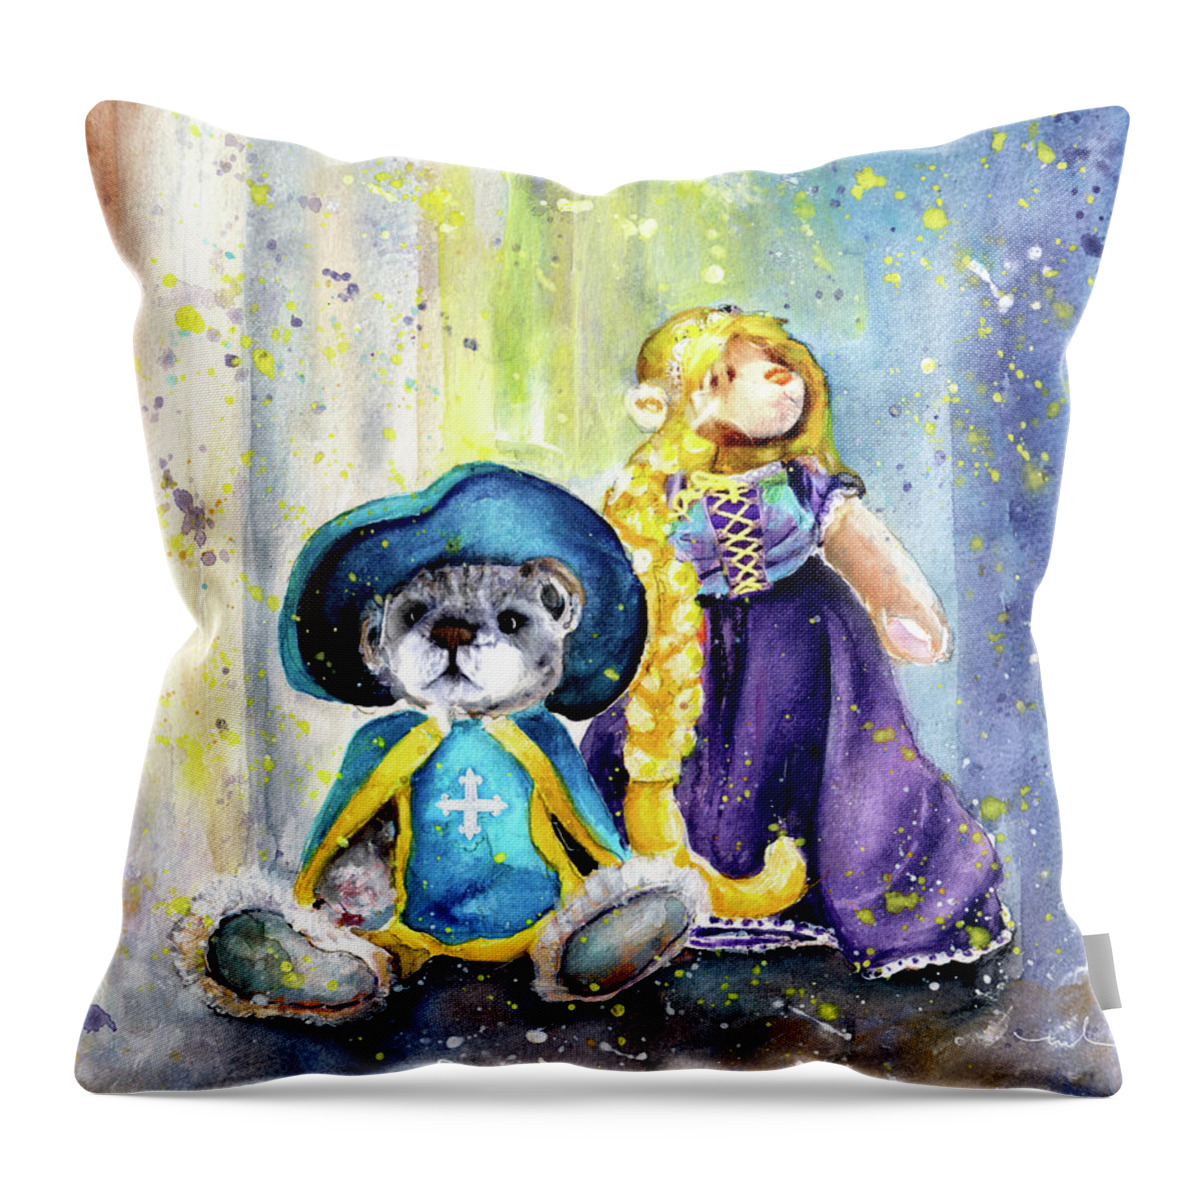 Teddy Throw Pillow featuring the painting Charlie Bears Faux Pas And Princess by Miki De Goodaboom